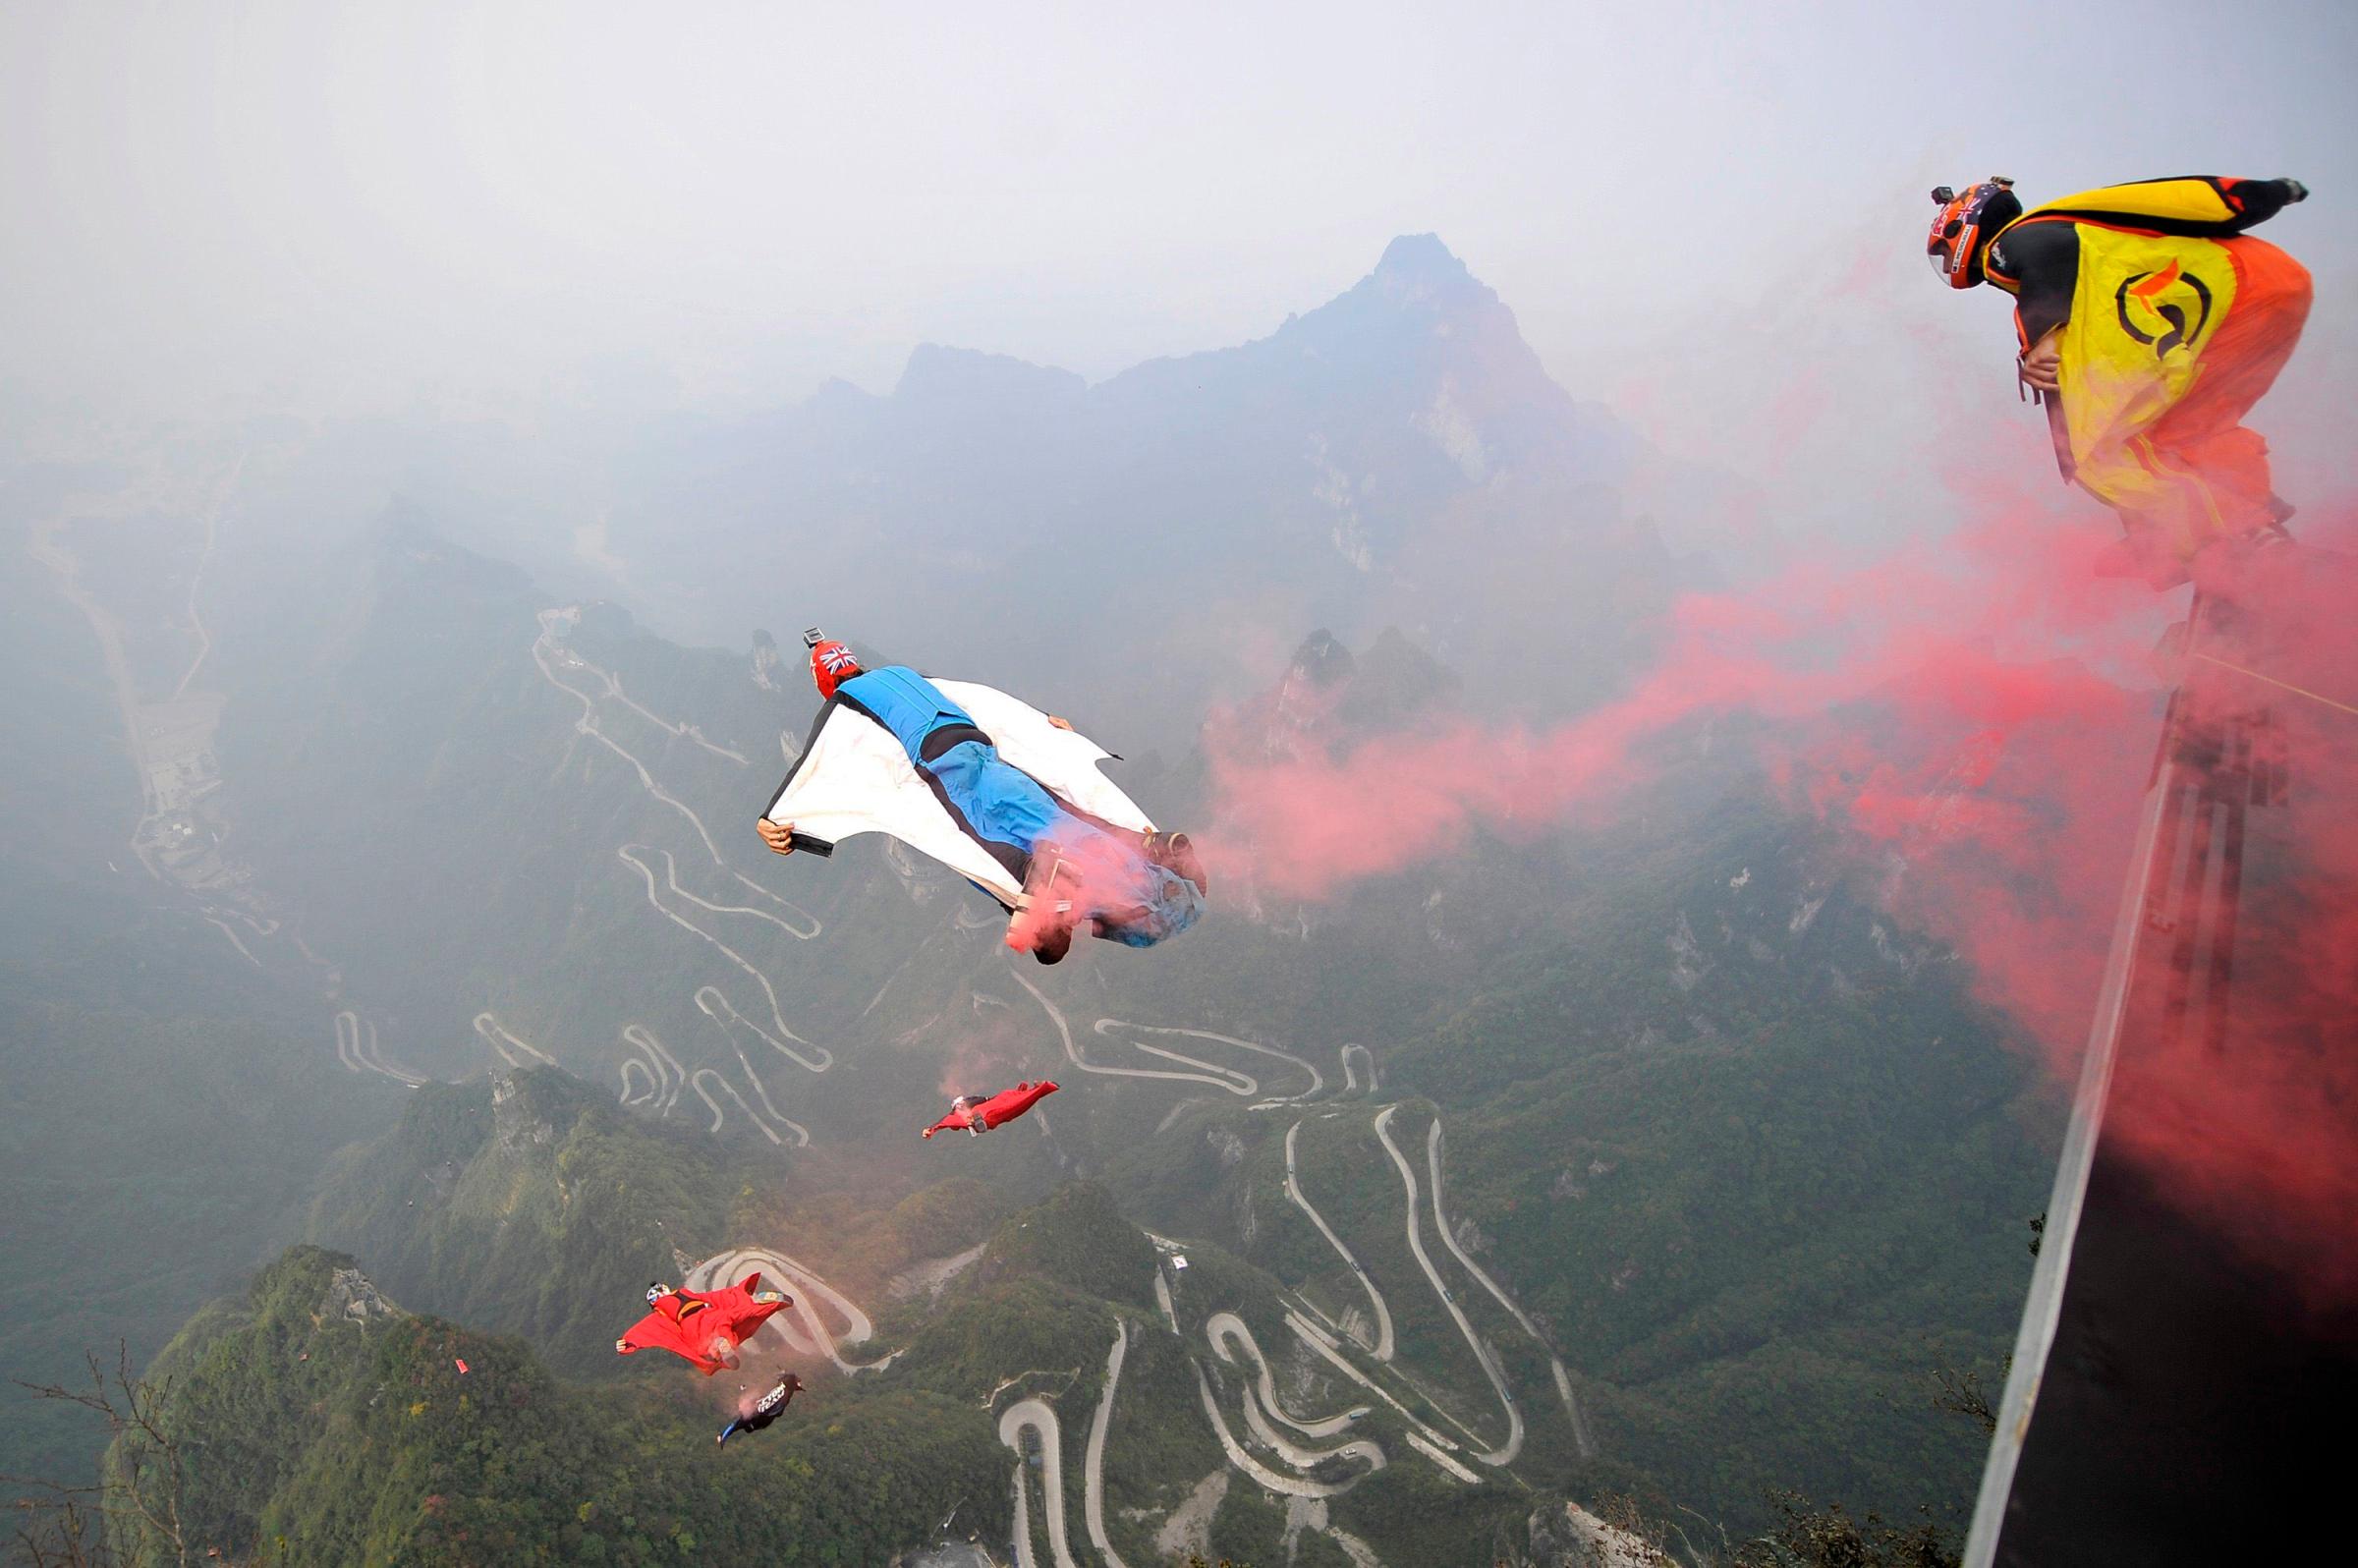 Wingsuit flyer contestants jump off a mountain at Tianmen Mountain National Park in Zhangjiajie